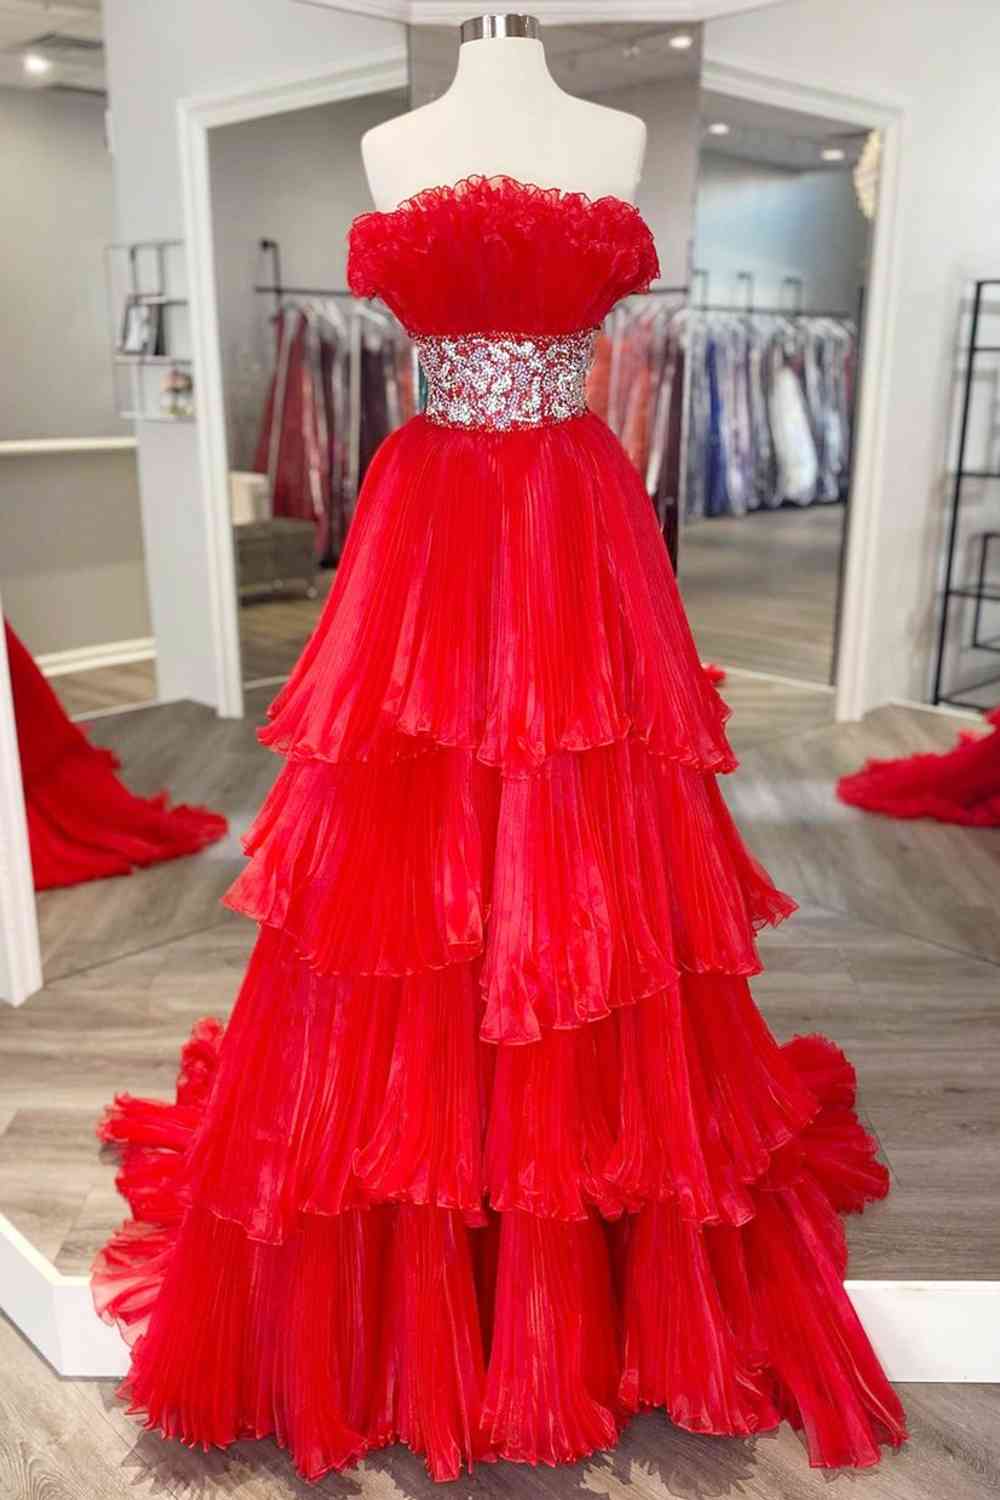 Strapless Red Ruffle Prom Dresses, Red Ruffle Strapless Formal